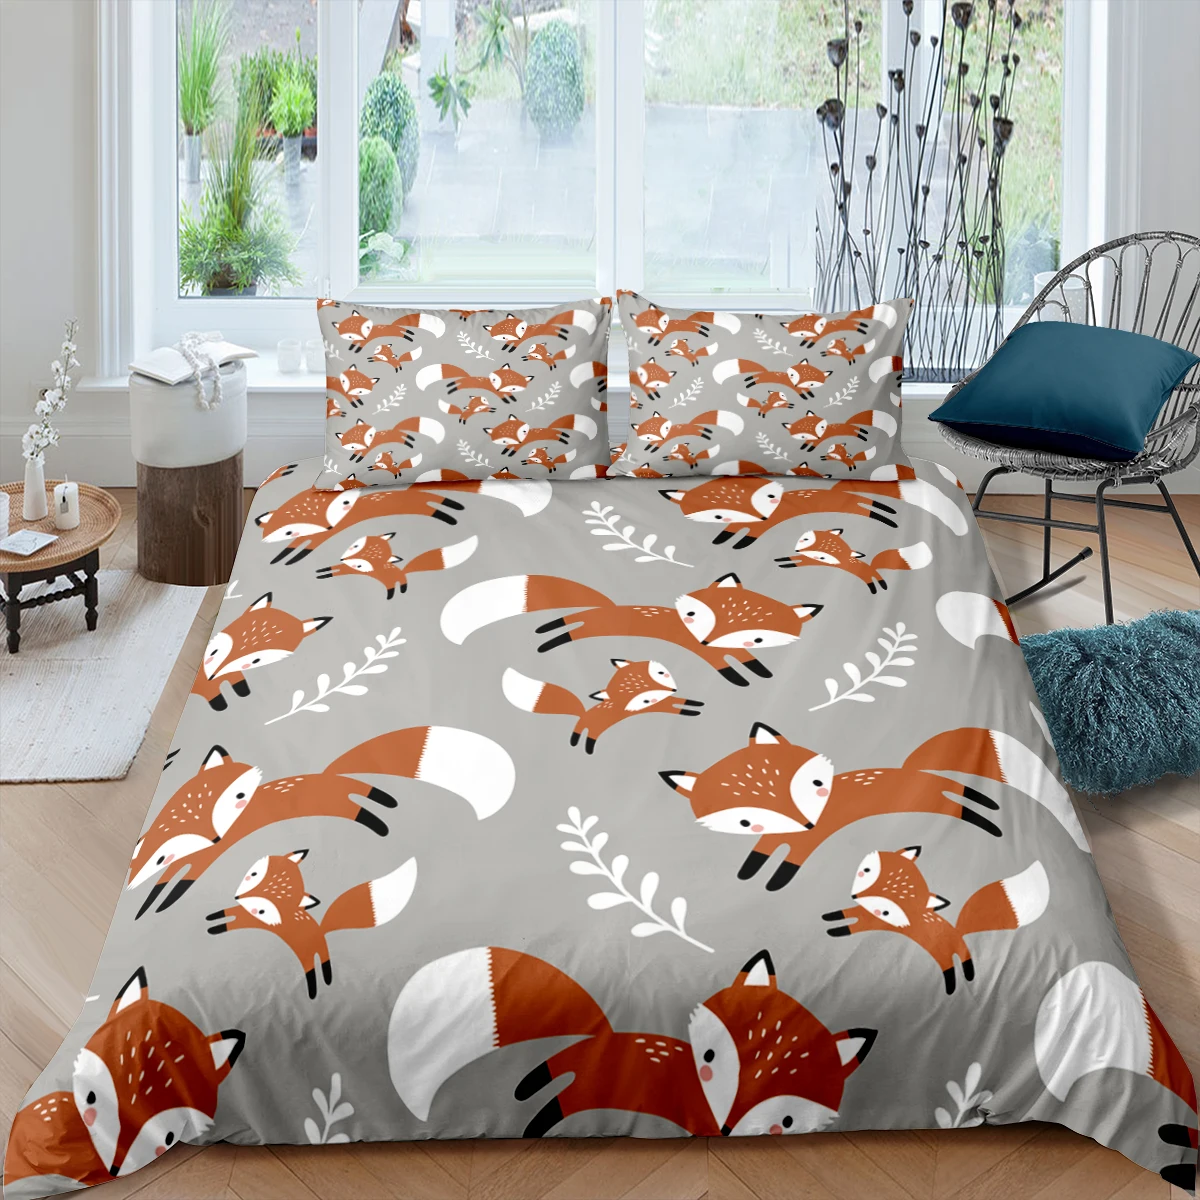 Home Textiles Luxury 3D Cartoon Fox Duvet Cover Set Pillowcase Animals Bedding Set Queen and King Size Comforter Bedding Sets best bed sheets